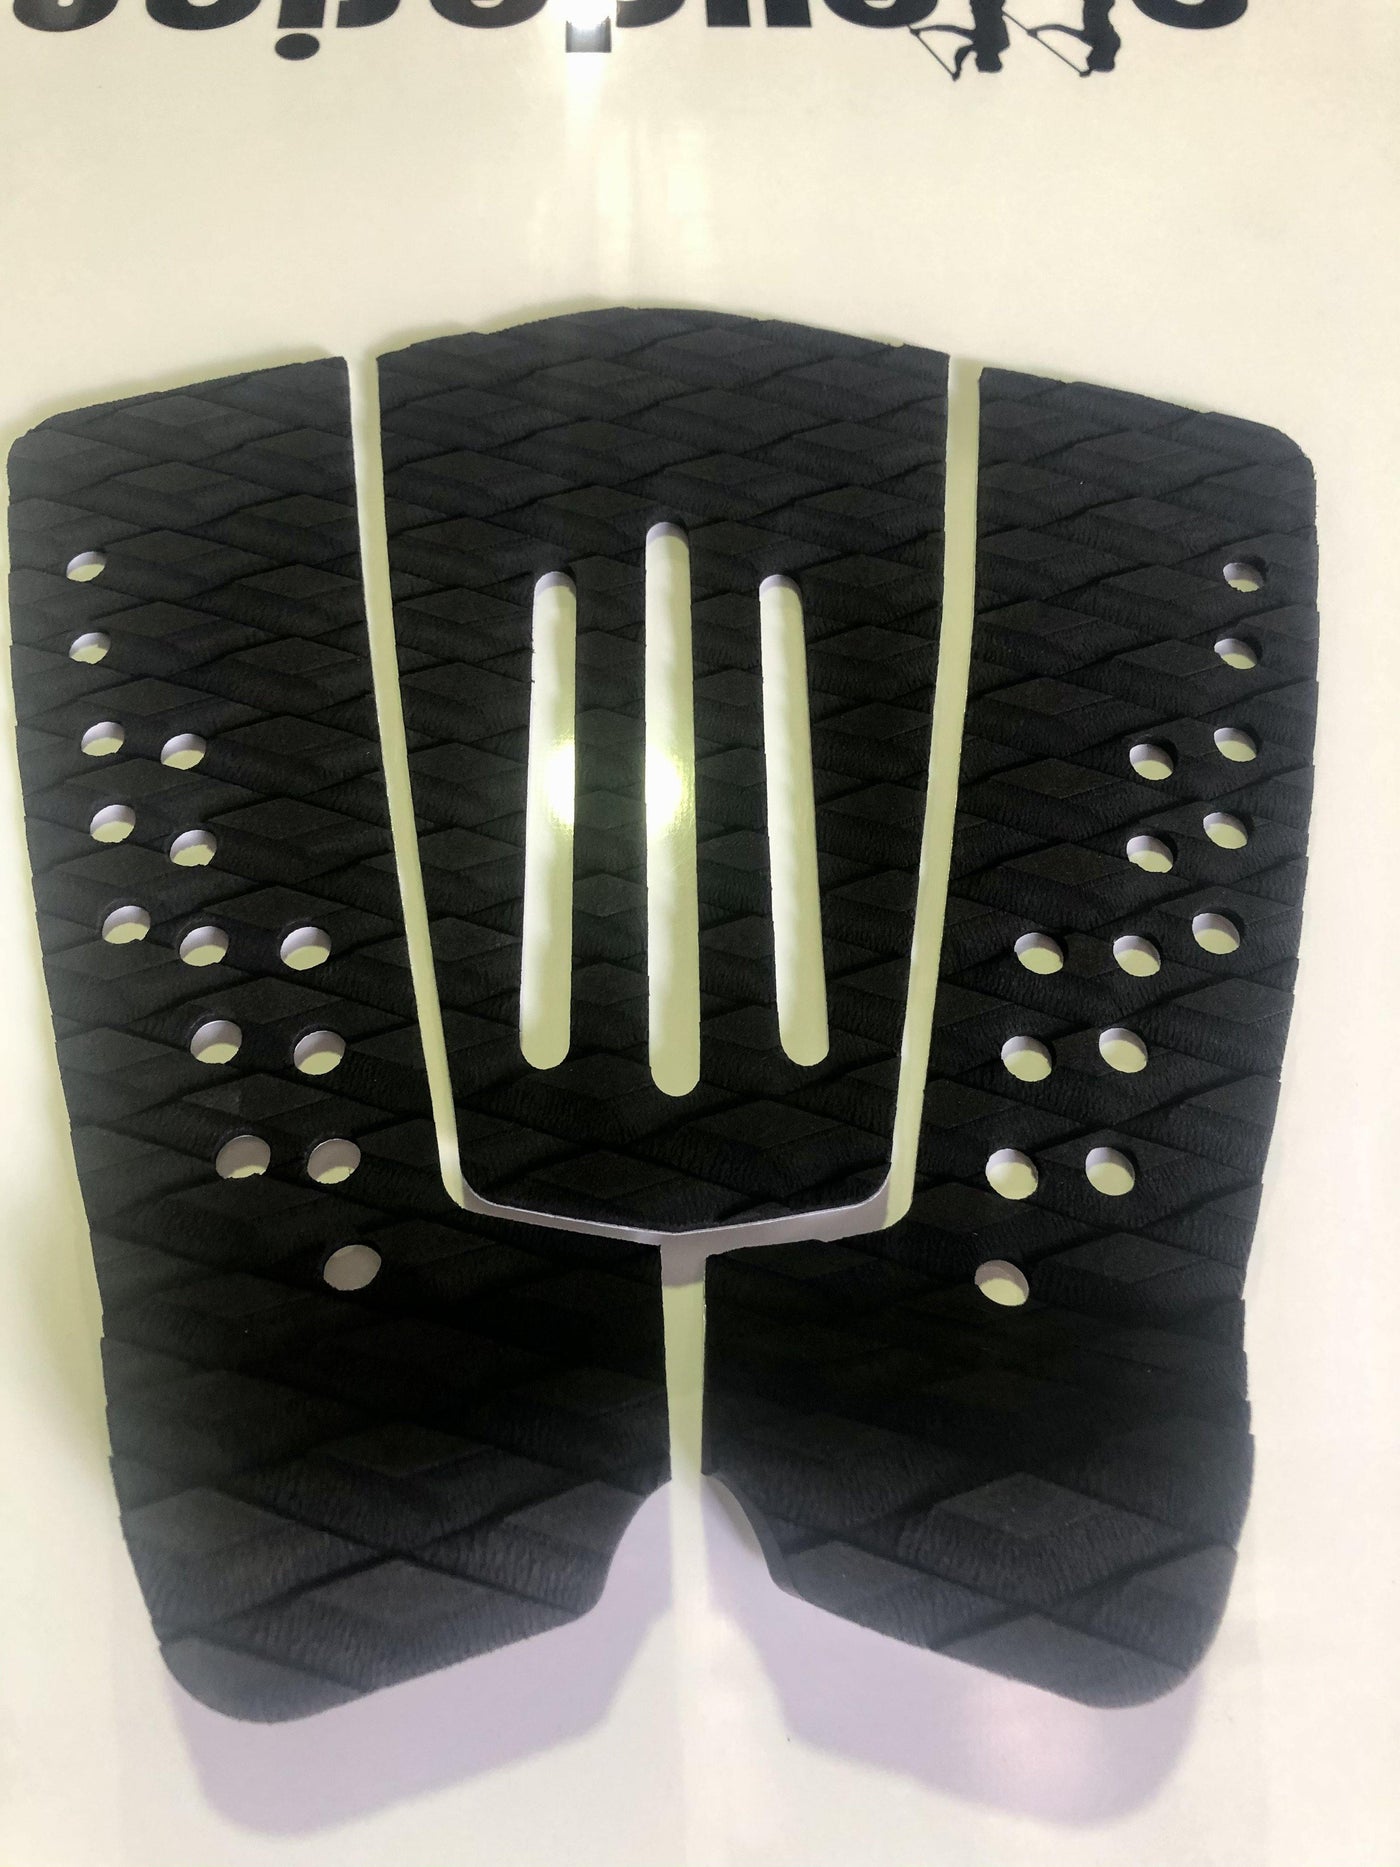 Surfboard Tail pad - Black, Free Shipping - Alleydesigns  Pty Ltd                                             ABN: 44165571264